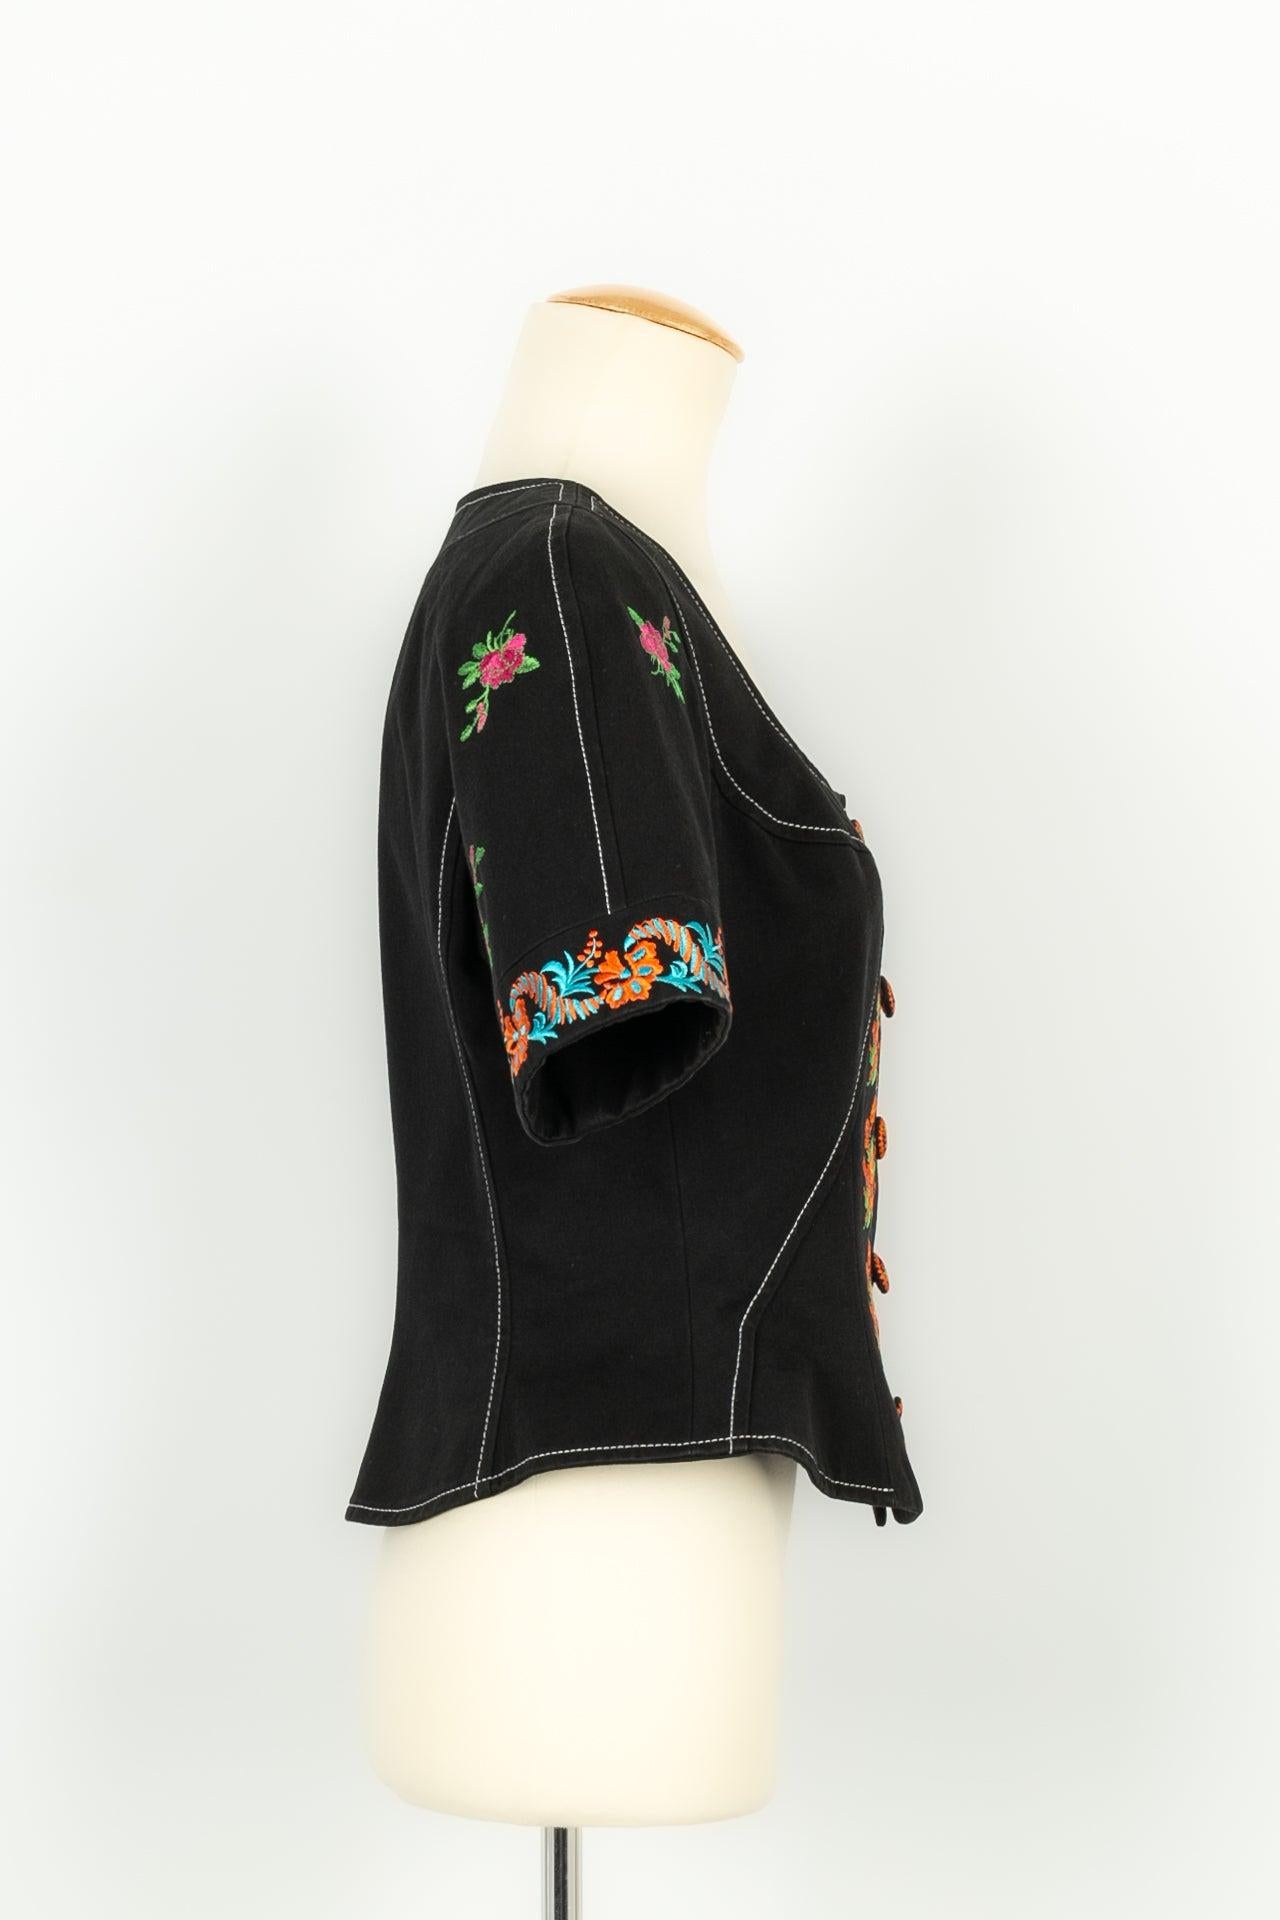 Christian Lacroix - (Made in France) Top in black cotton embroidered with multicolored flower patterns. Size 40FR. Spring-Summer 1993 Collection. To be noted, the black cotton is marbled but only inside the clothing.

Additional